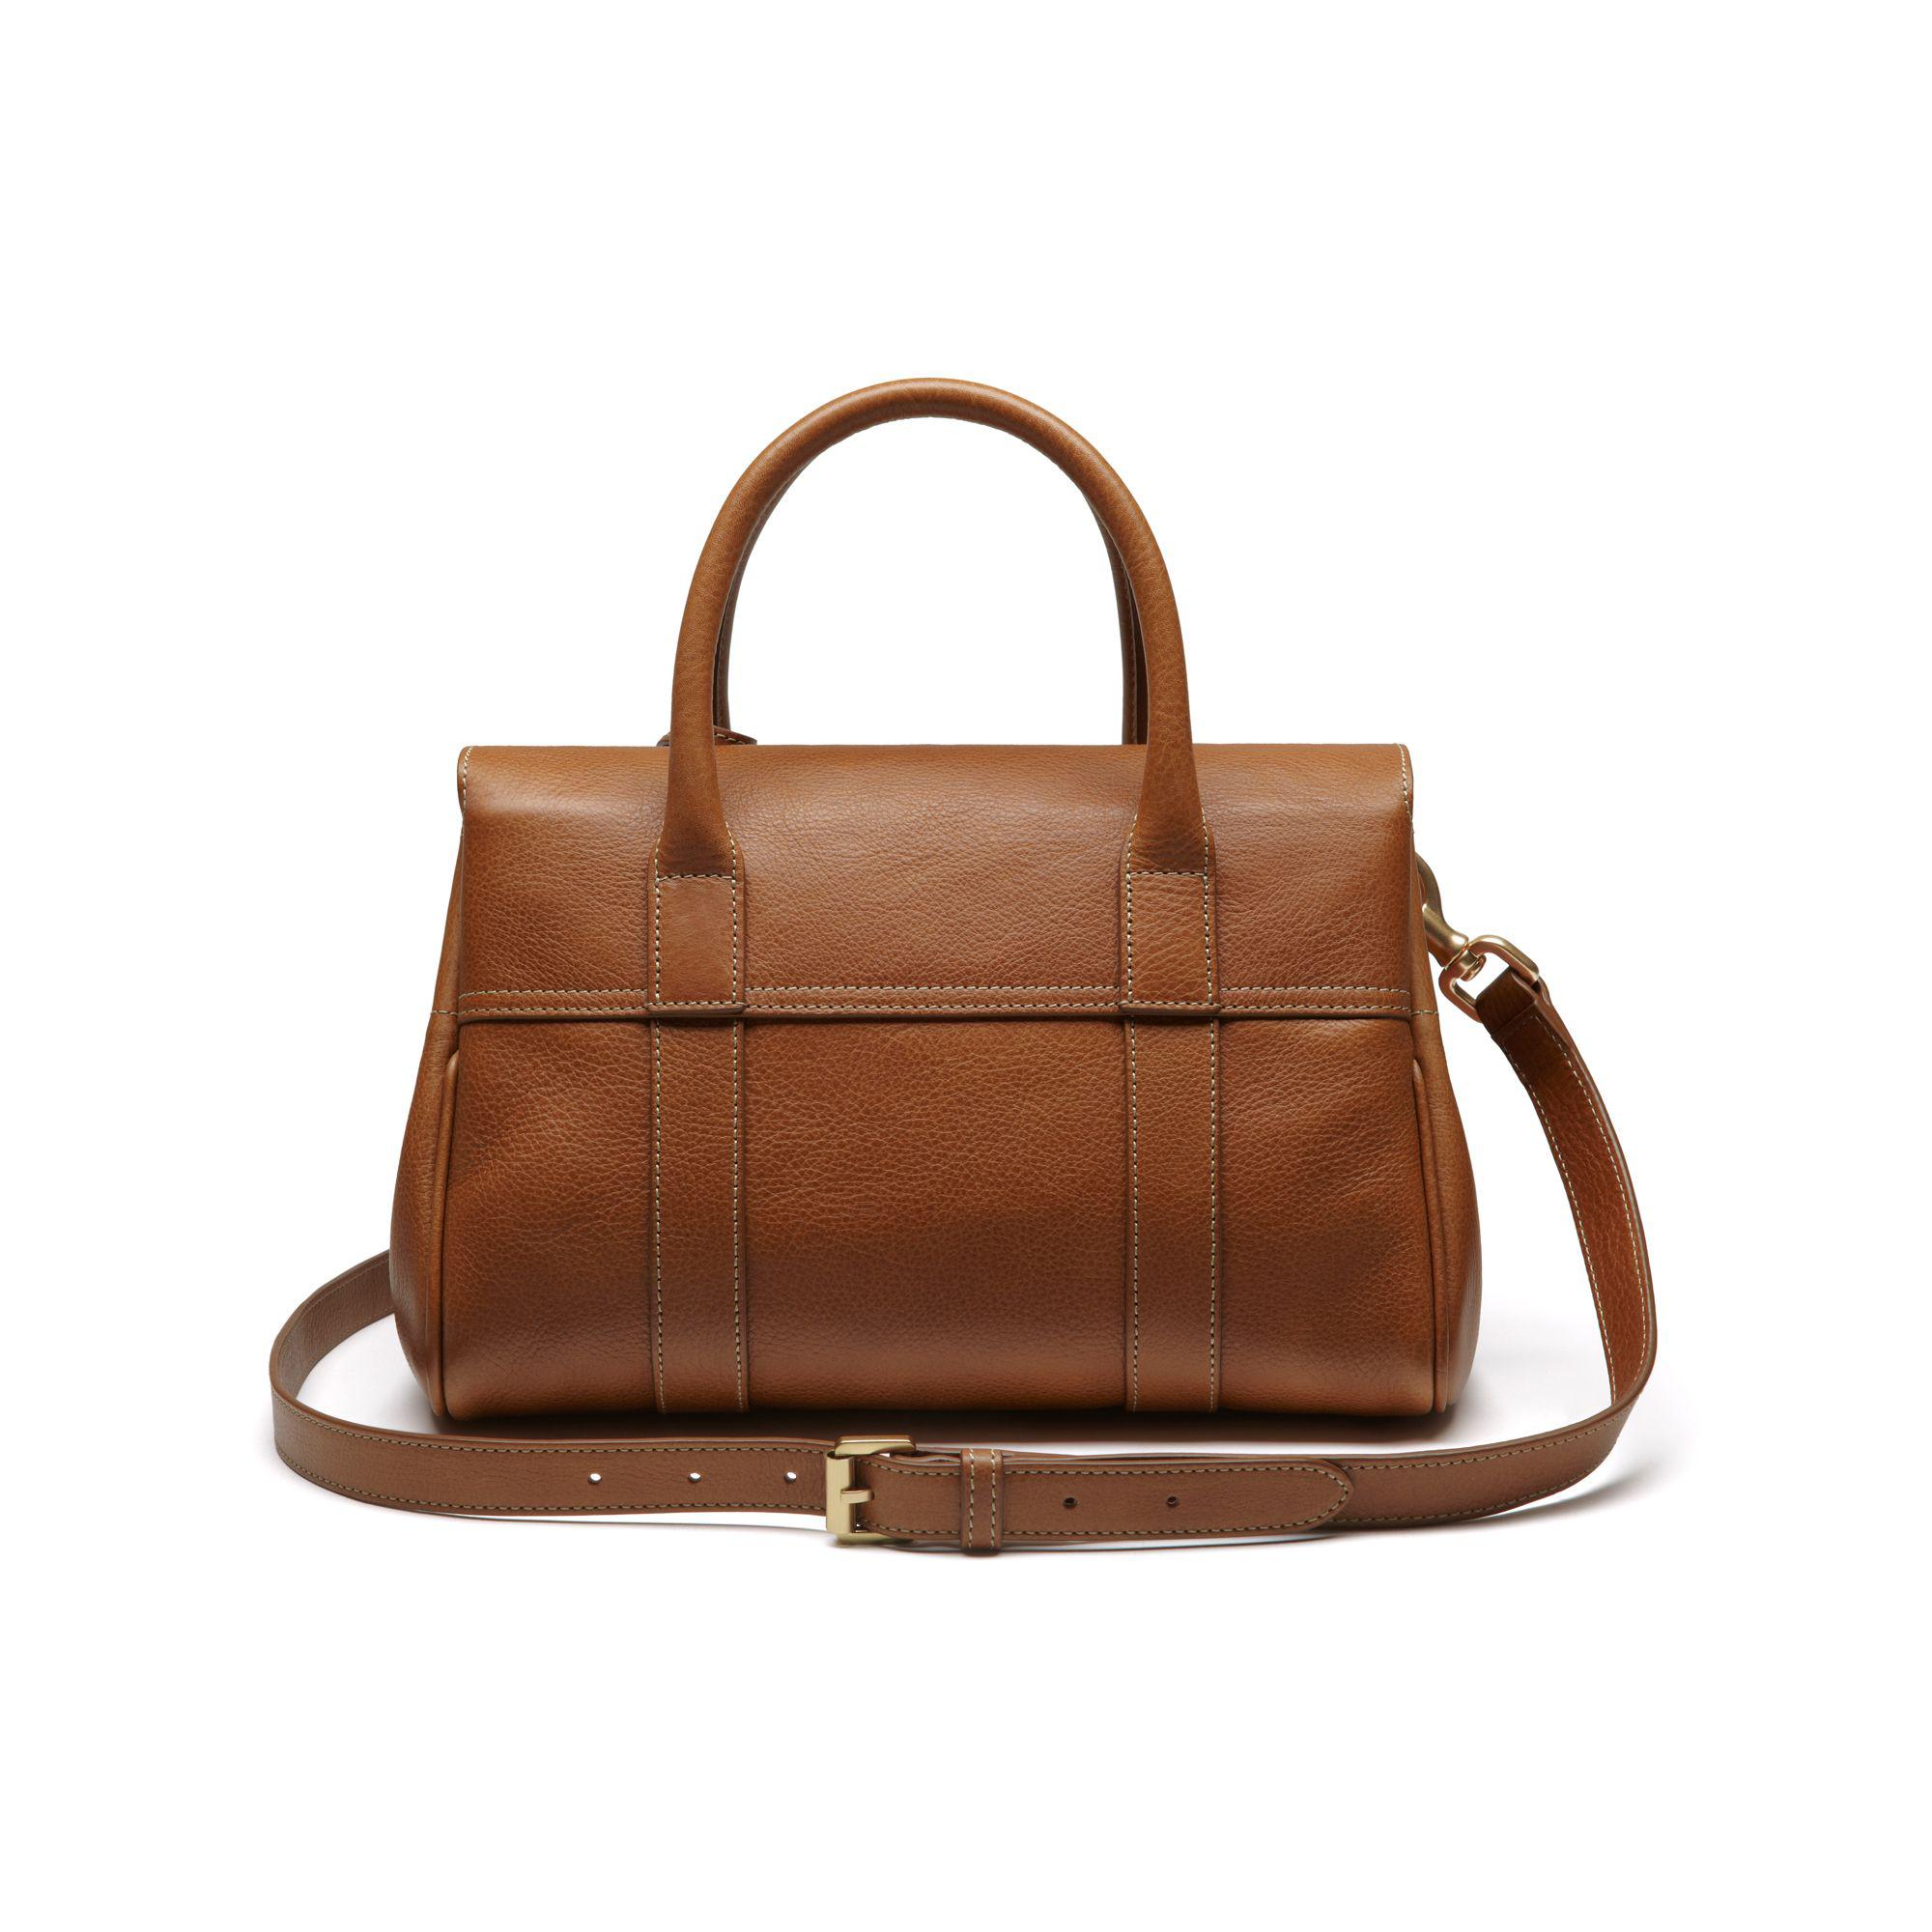 Mulberry Small Bayswater Leather Satchel in Oak (Brown) - Lyst